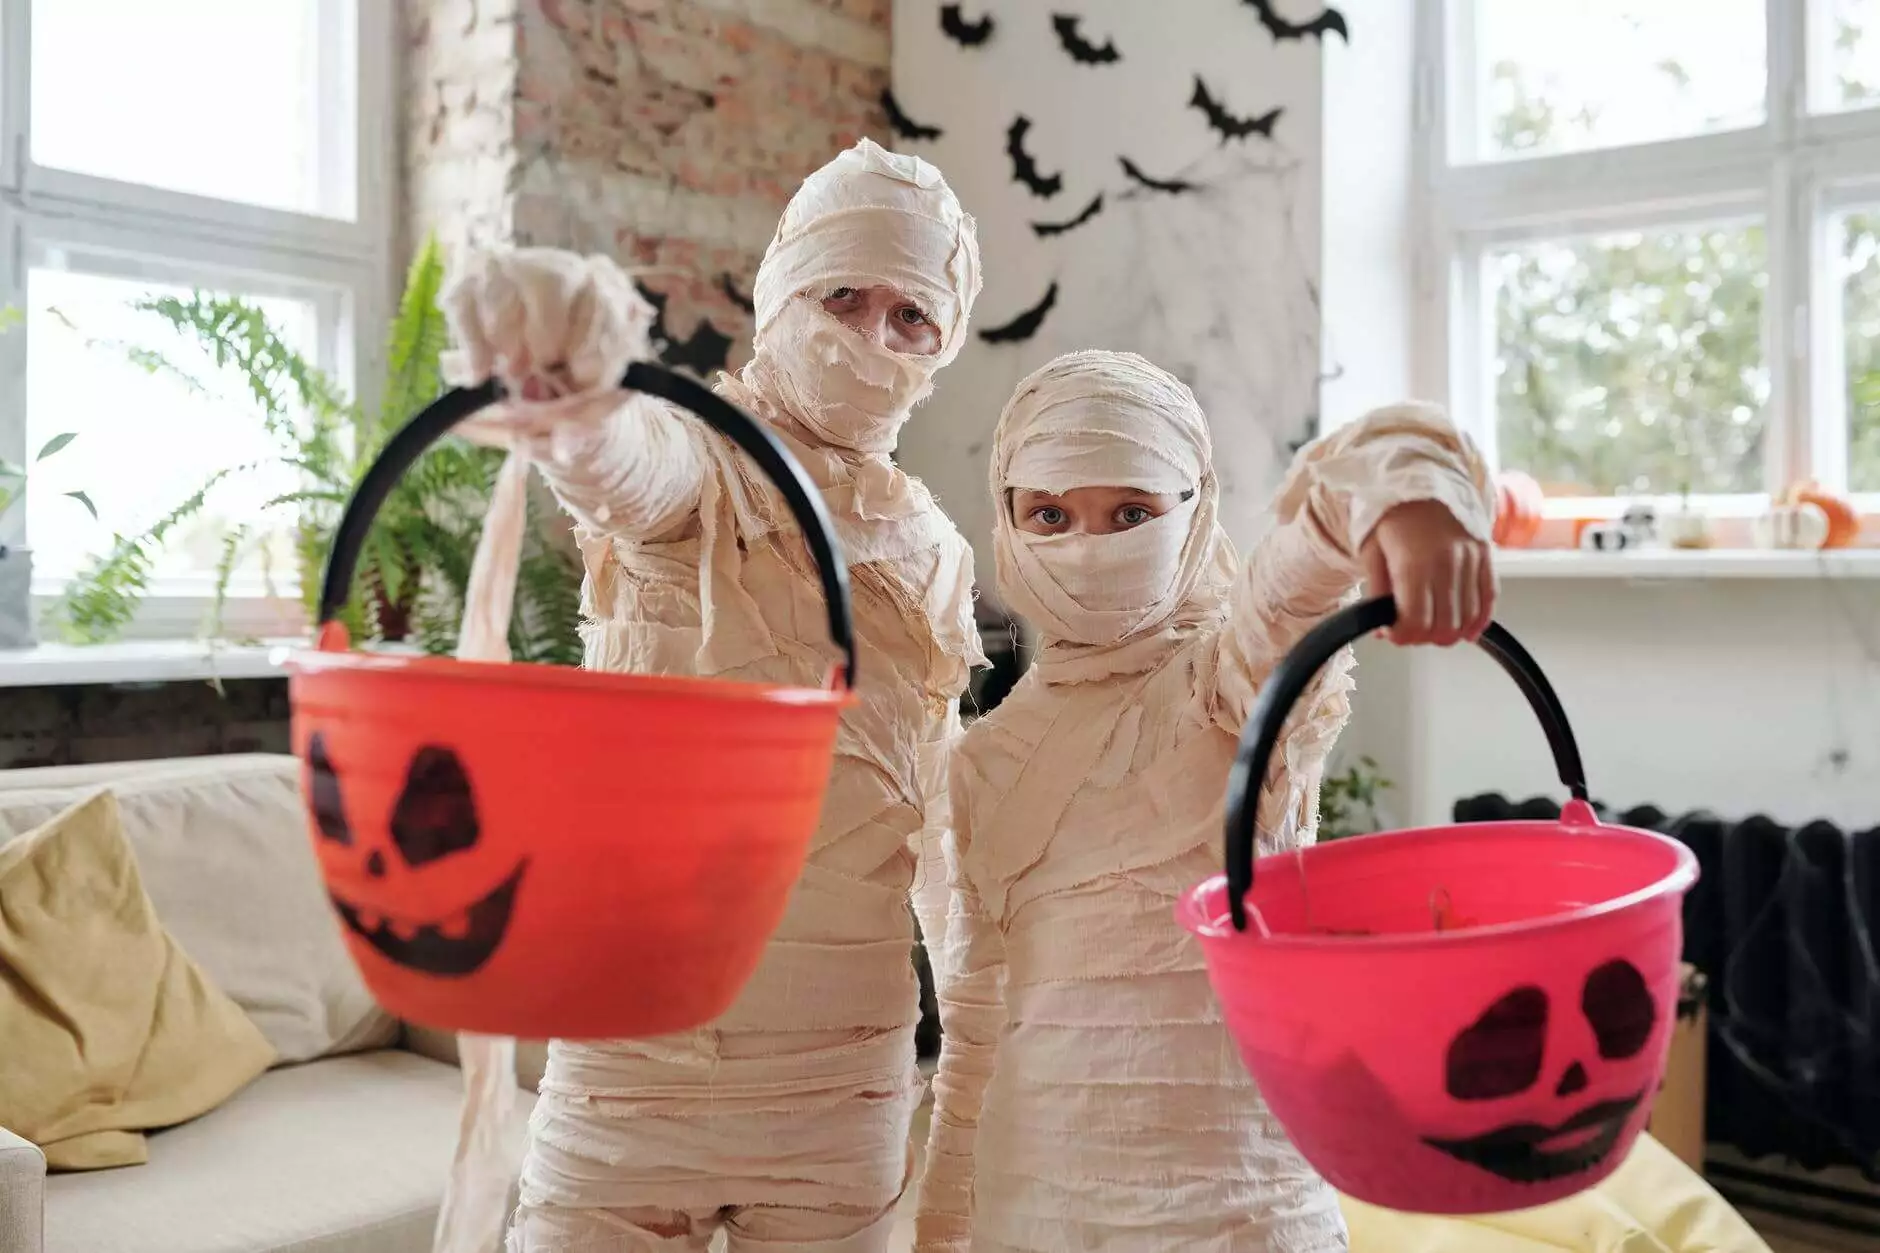 Pandemic-Style Halloween Fun Might Look Different, But the Holiday